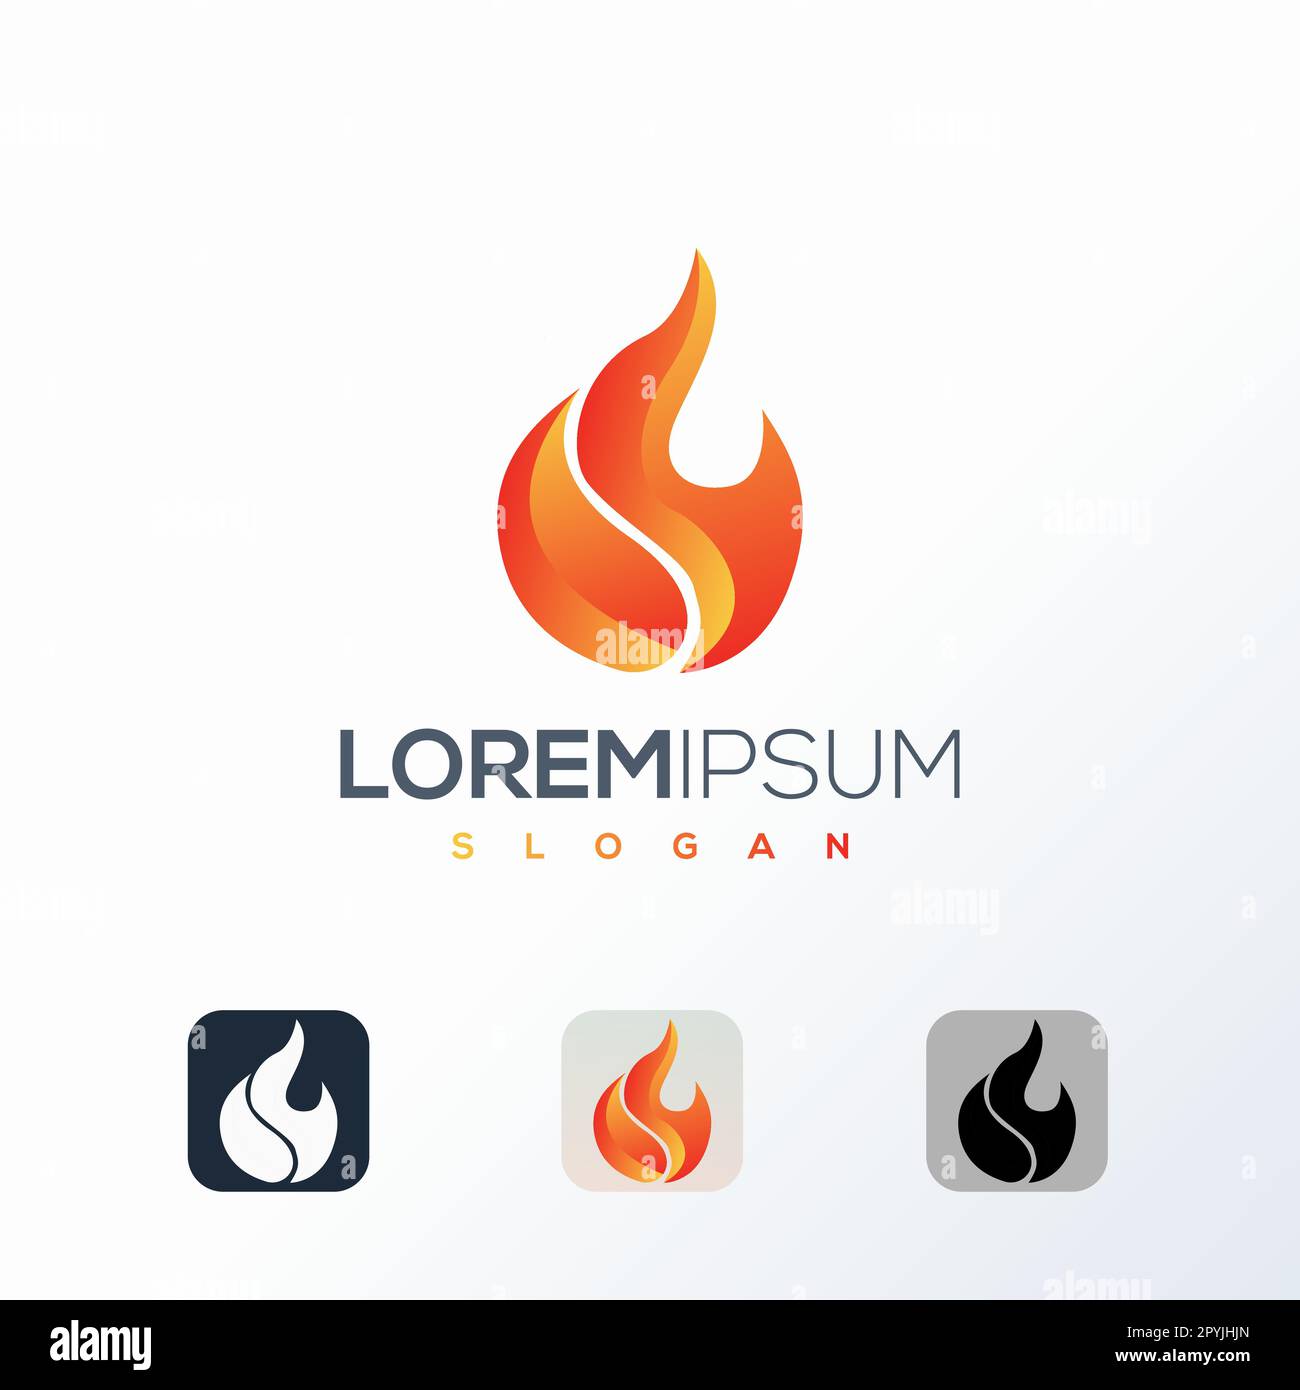 Fire logo design template. Vector illustration. Red, orange and black colors. Vector logotype element for corporate identity. Stock Vector